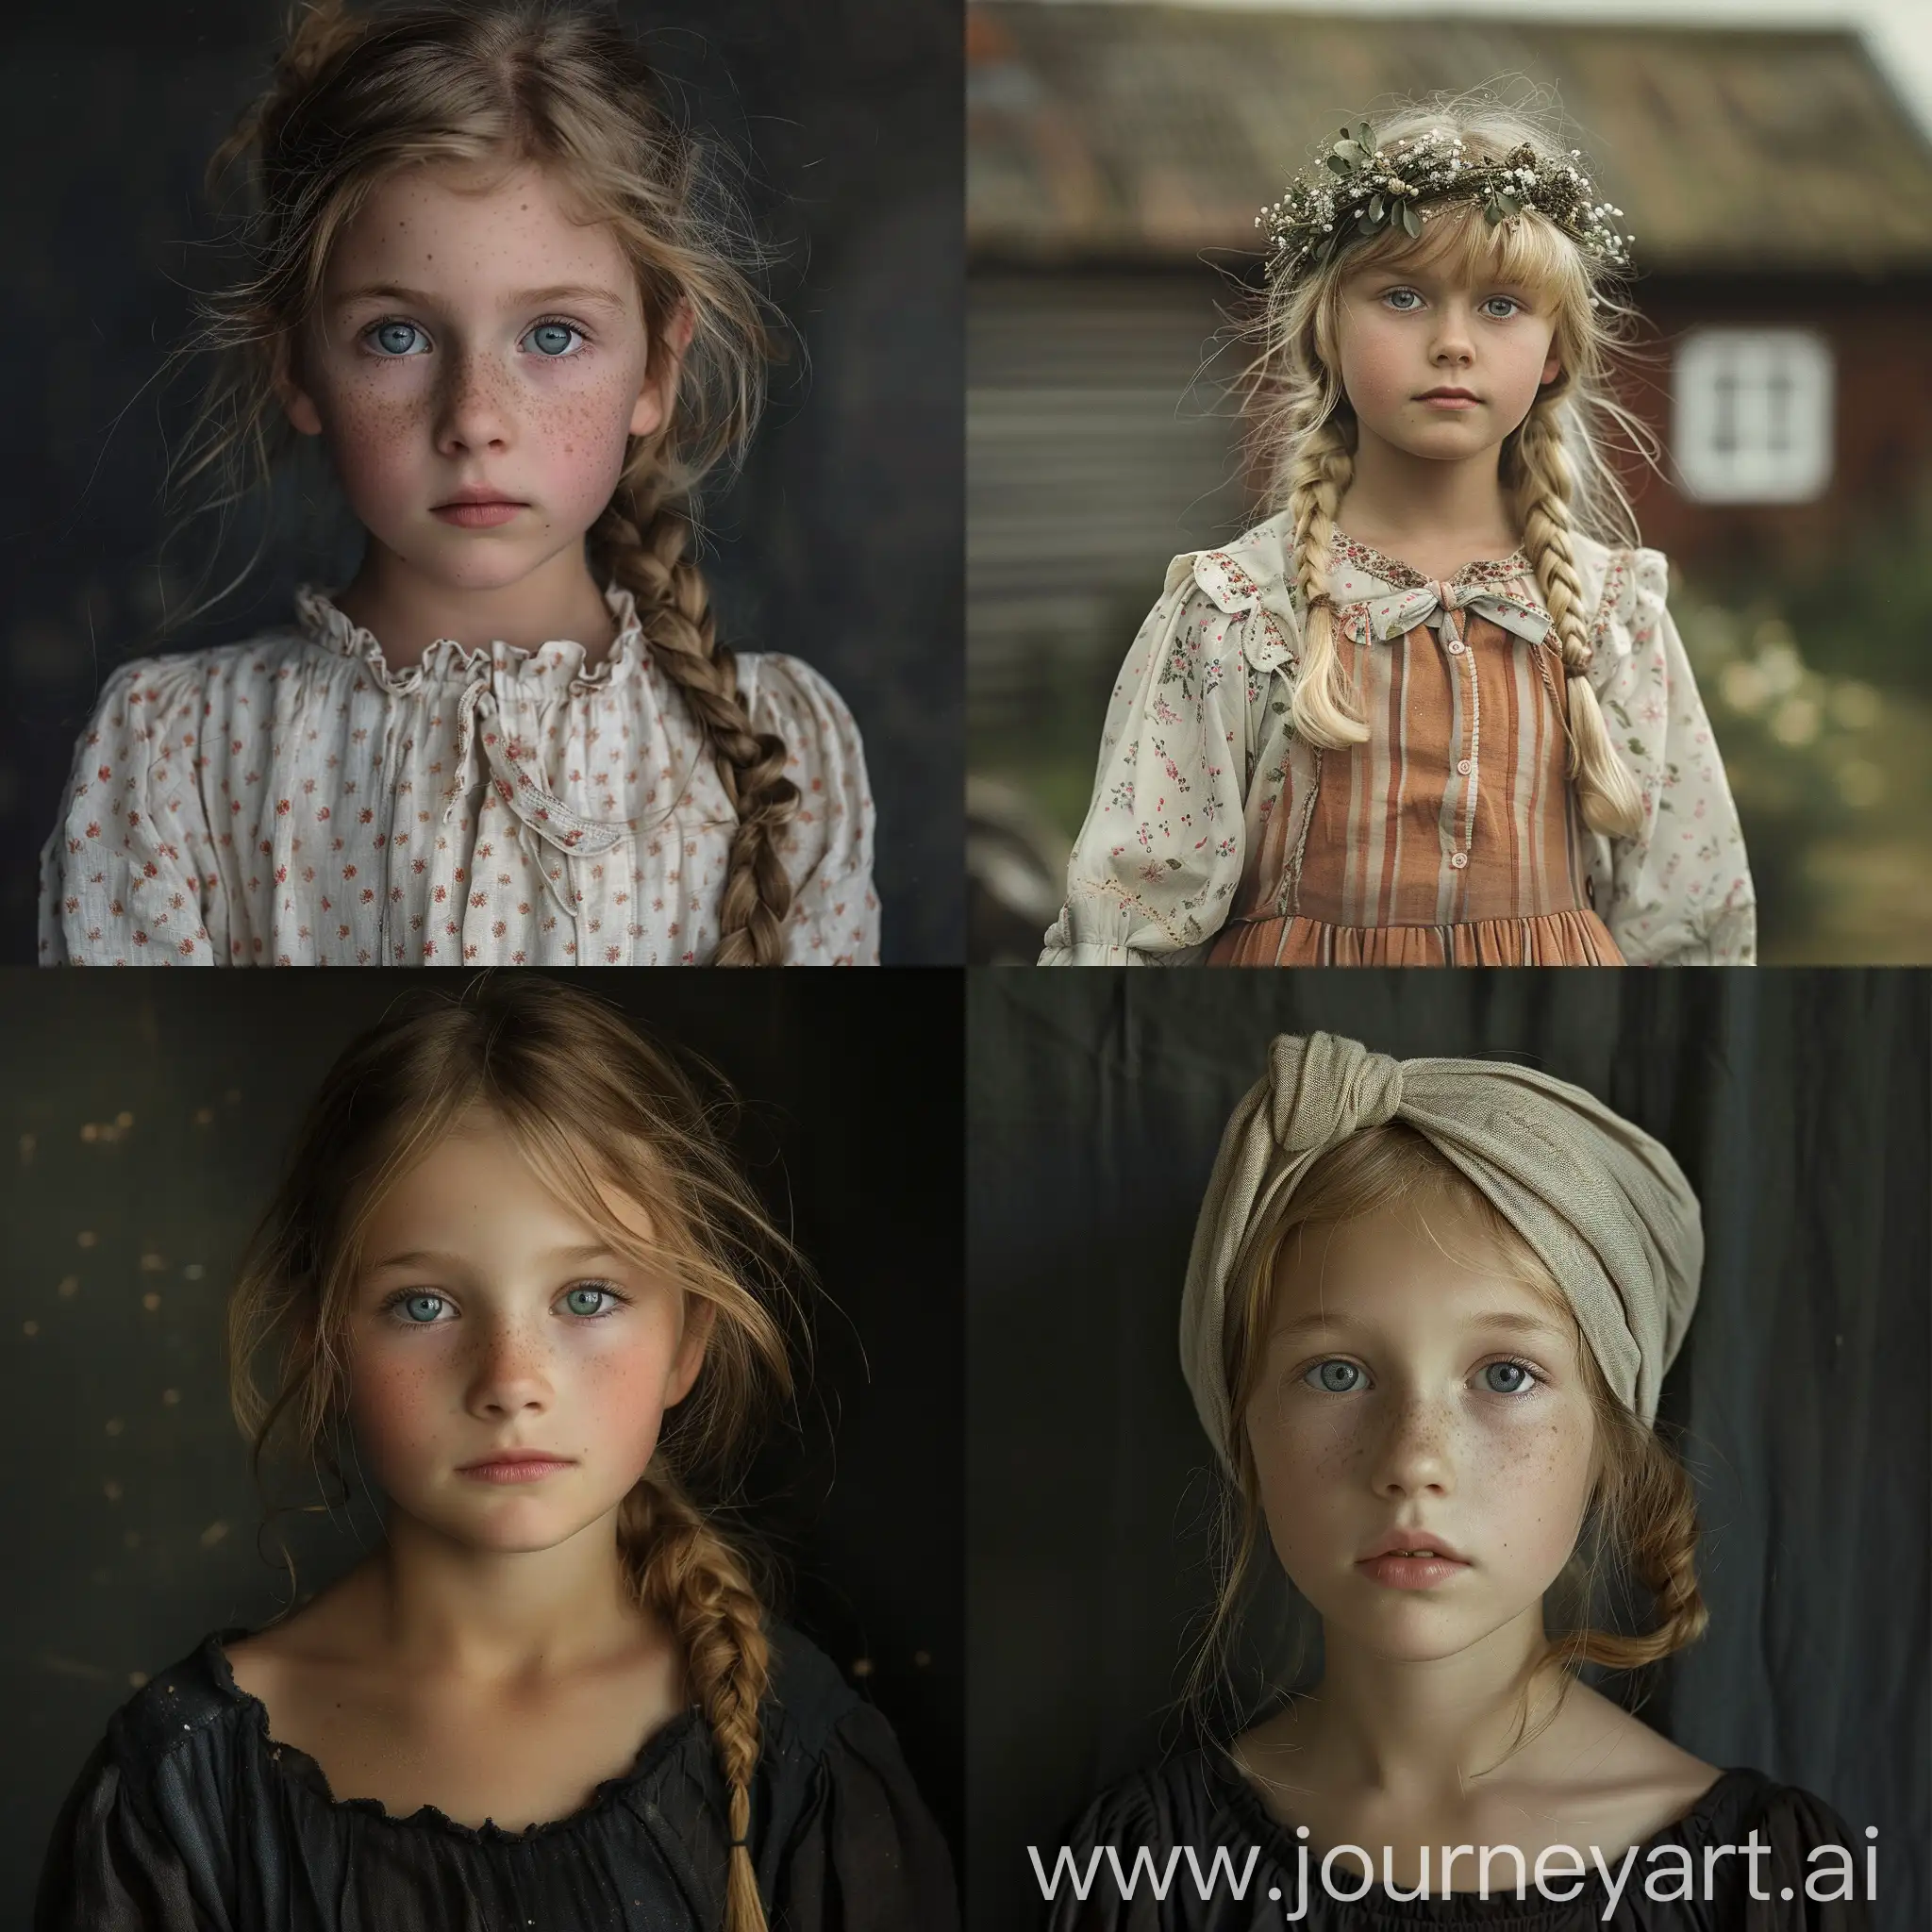 Young-Danish-Girl-in-Traditional-Attire